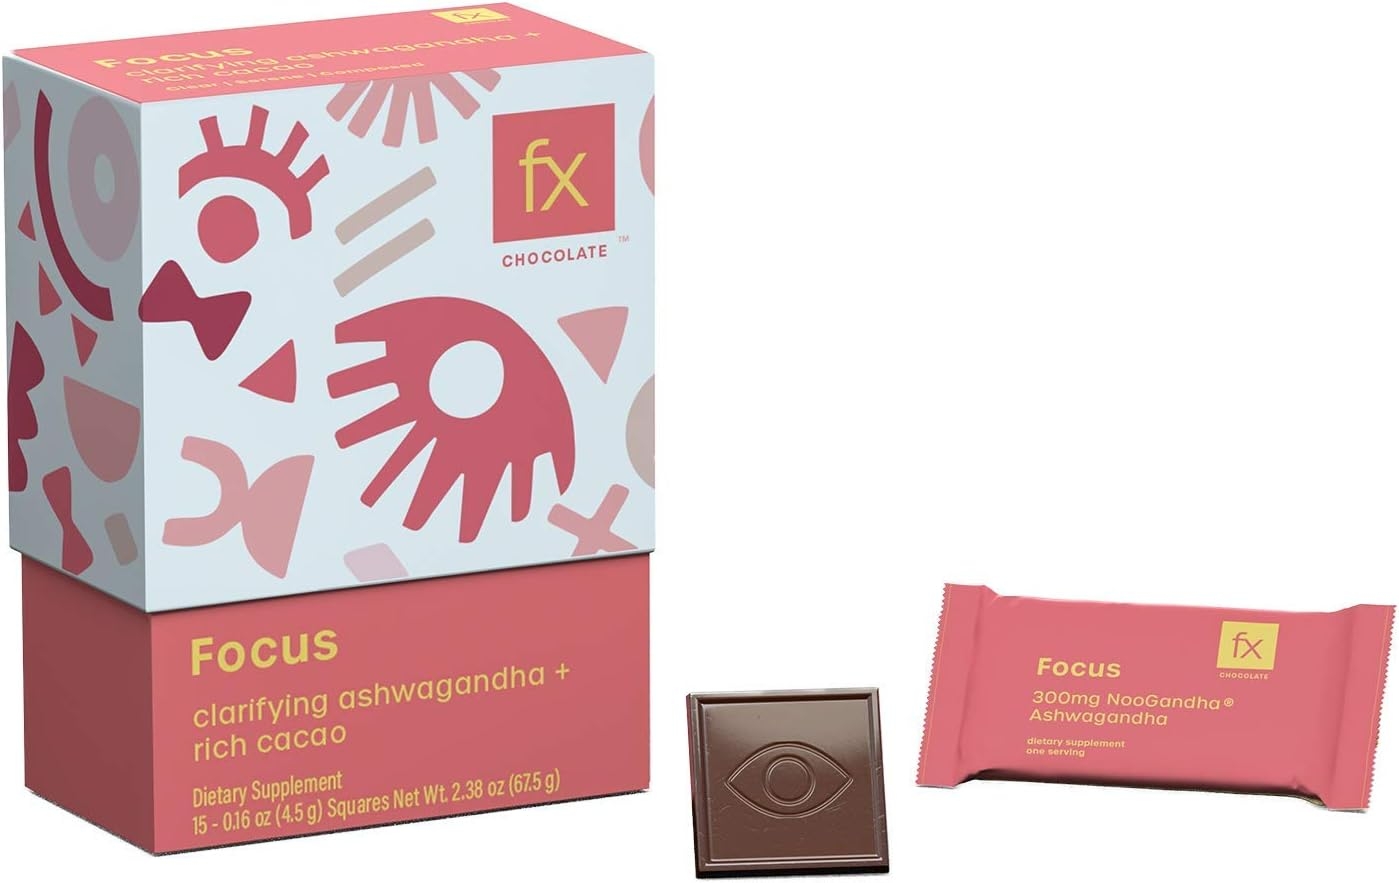 Fx Chocolate Focus - Adaptogen Chocolate Supplement to Support Concentration, Clarity + Calm with Cacao + Ashwagandha - Keto Dark Chocolate - Sugar-Free, Gluten-Free, Vegan + Non-GMO (Box of 15)